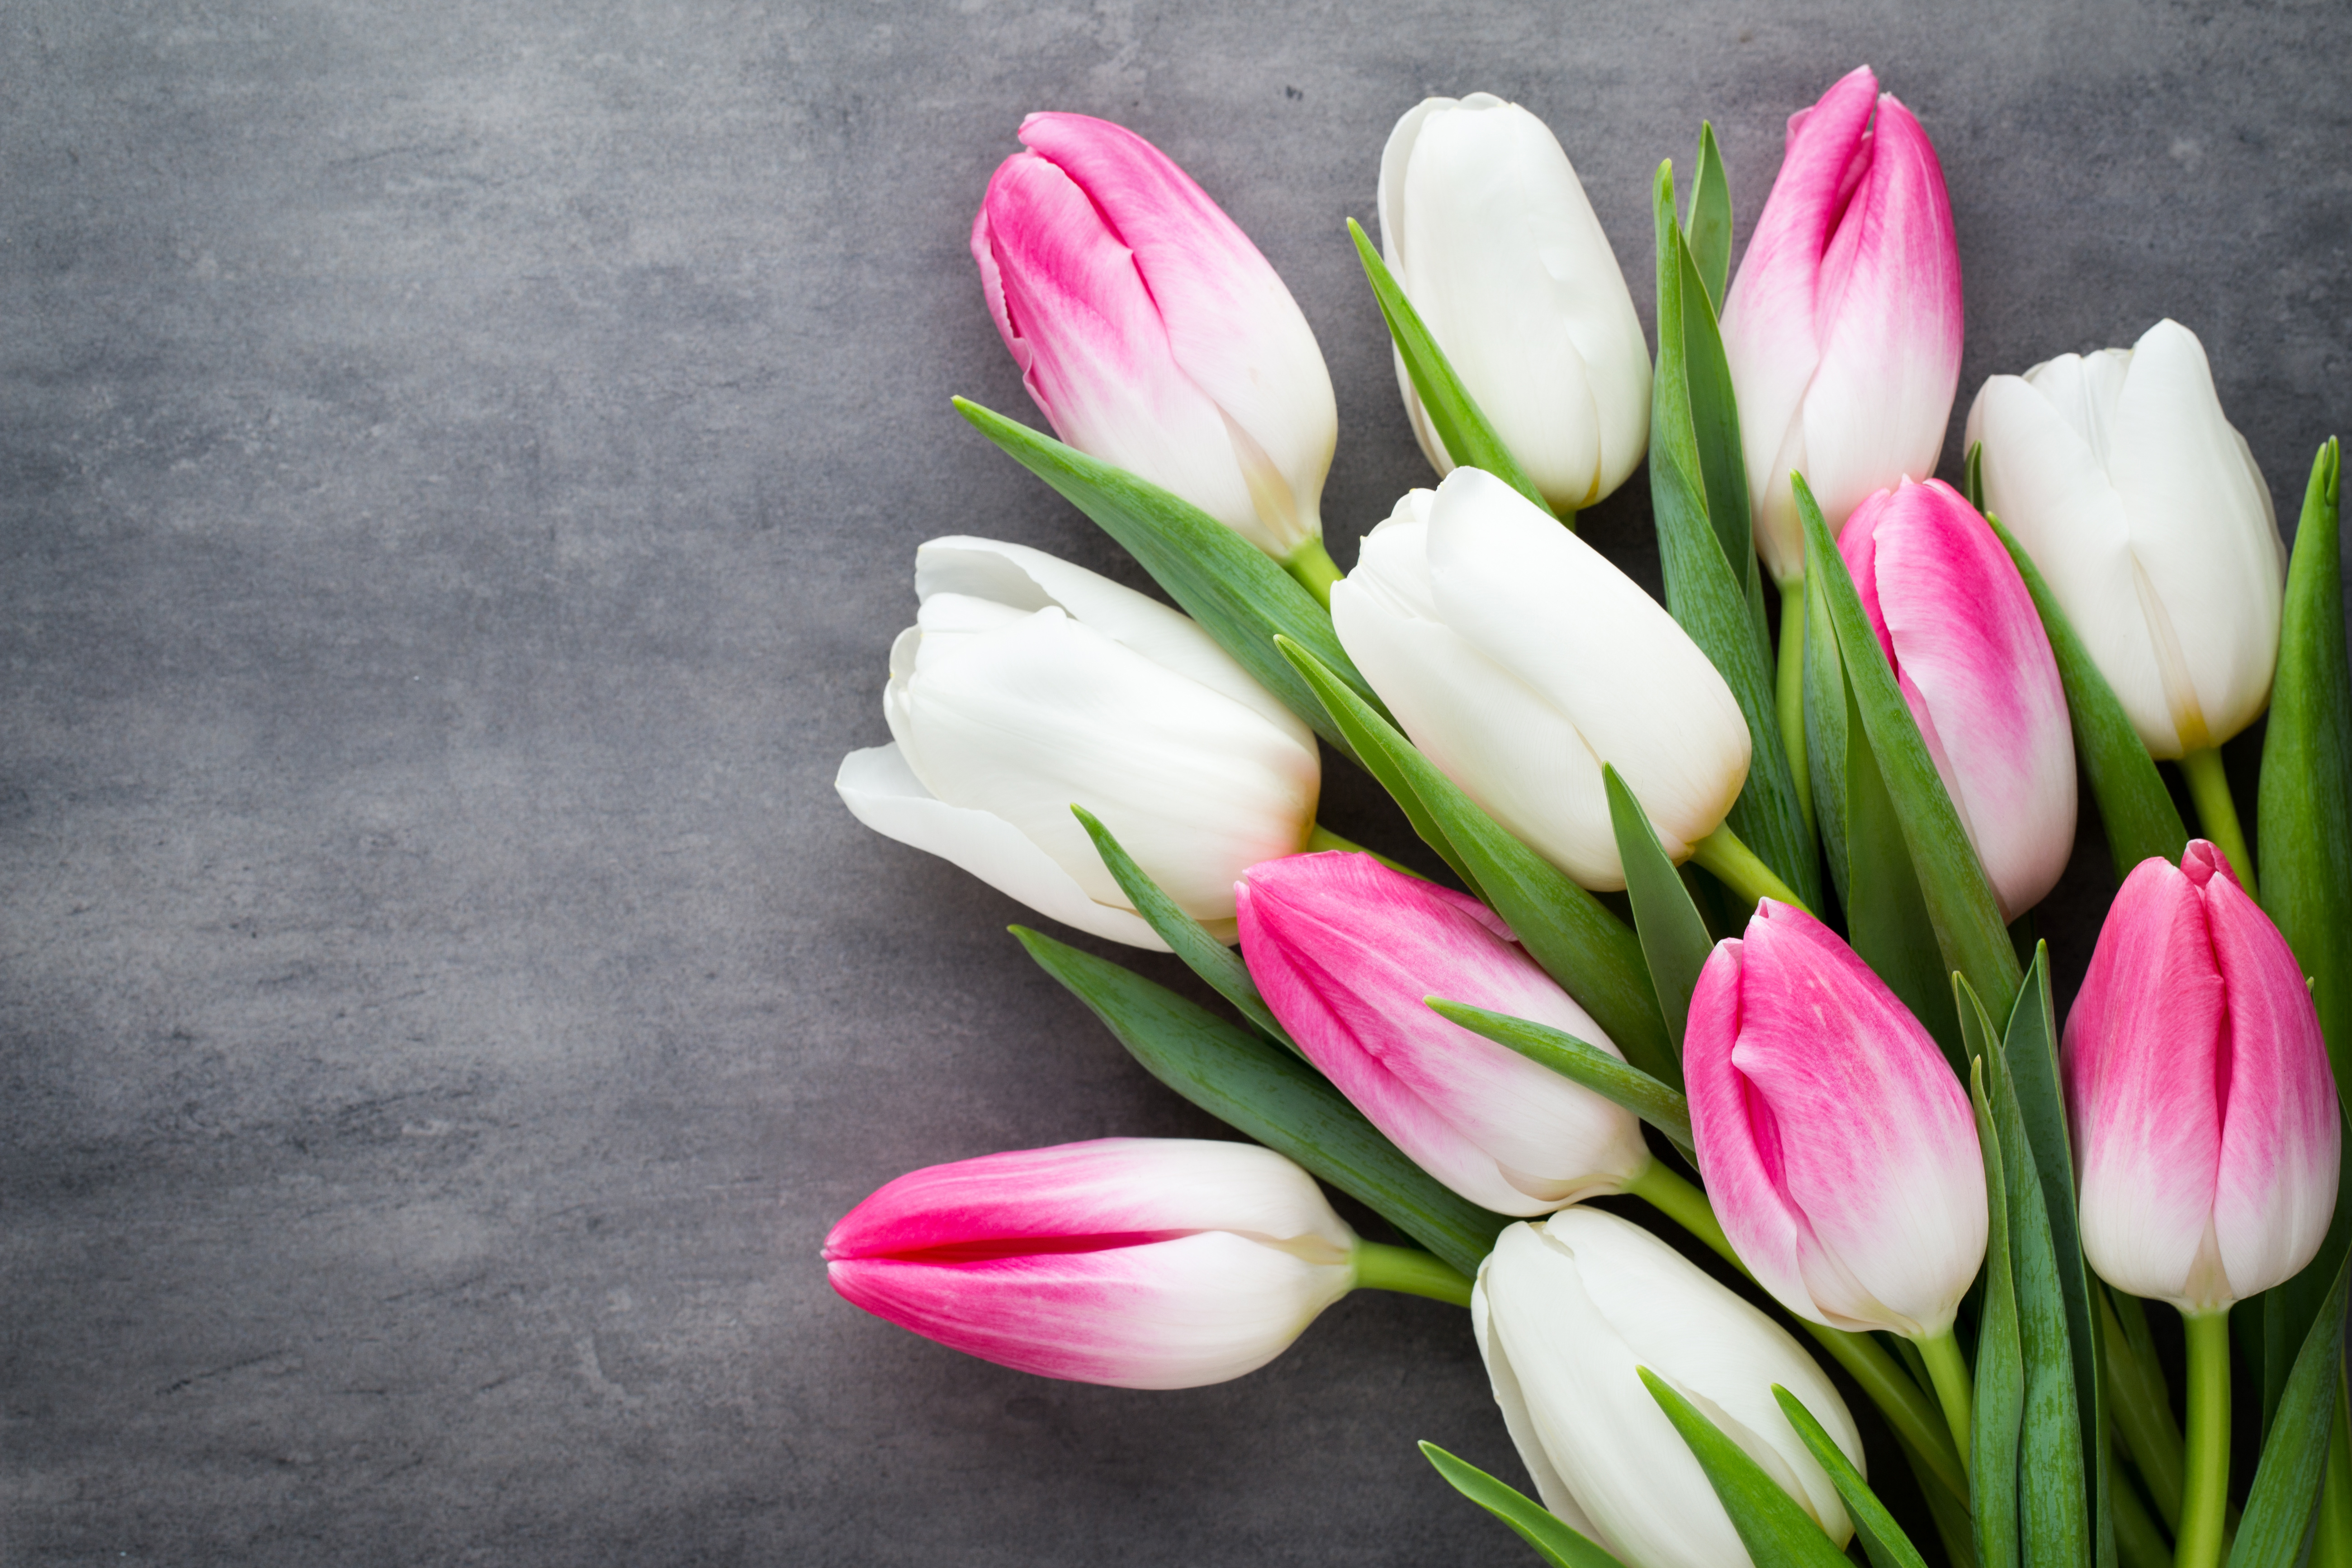 Pink and White Tulips 4k Ultra HD Wallpaper